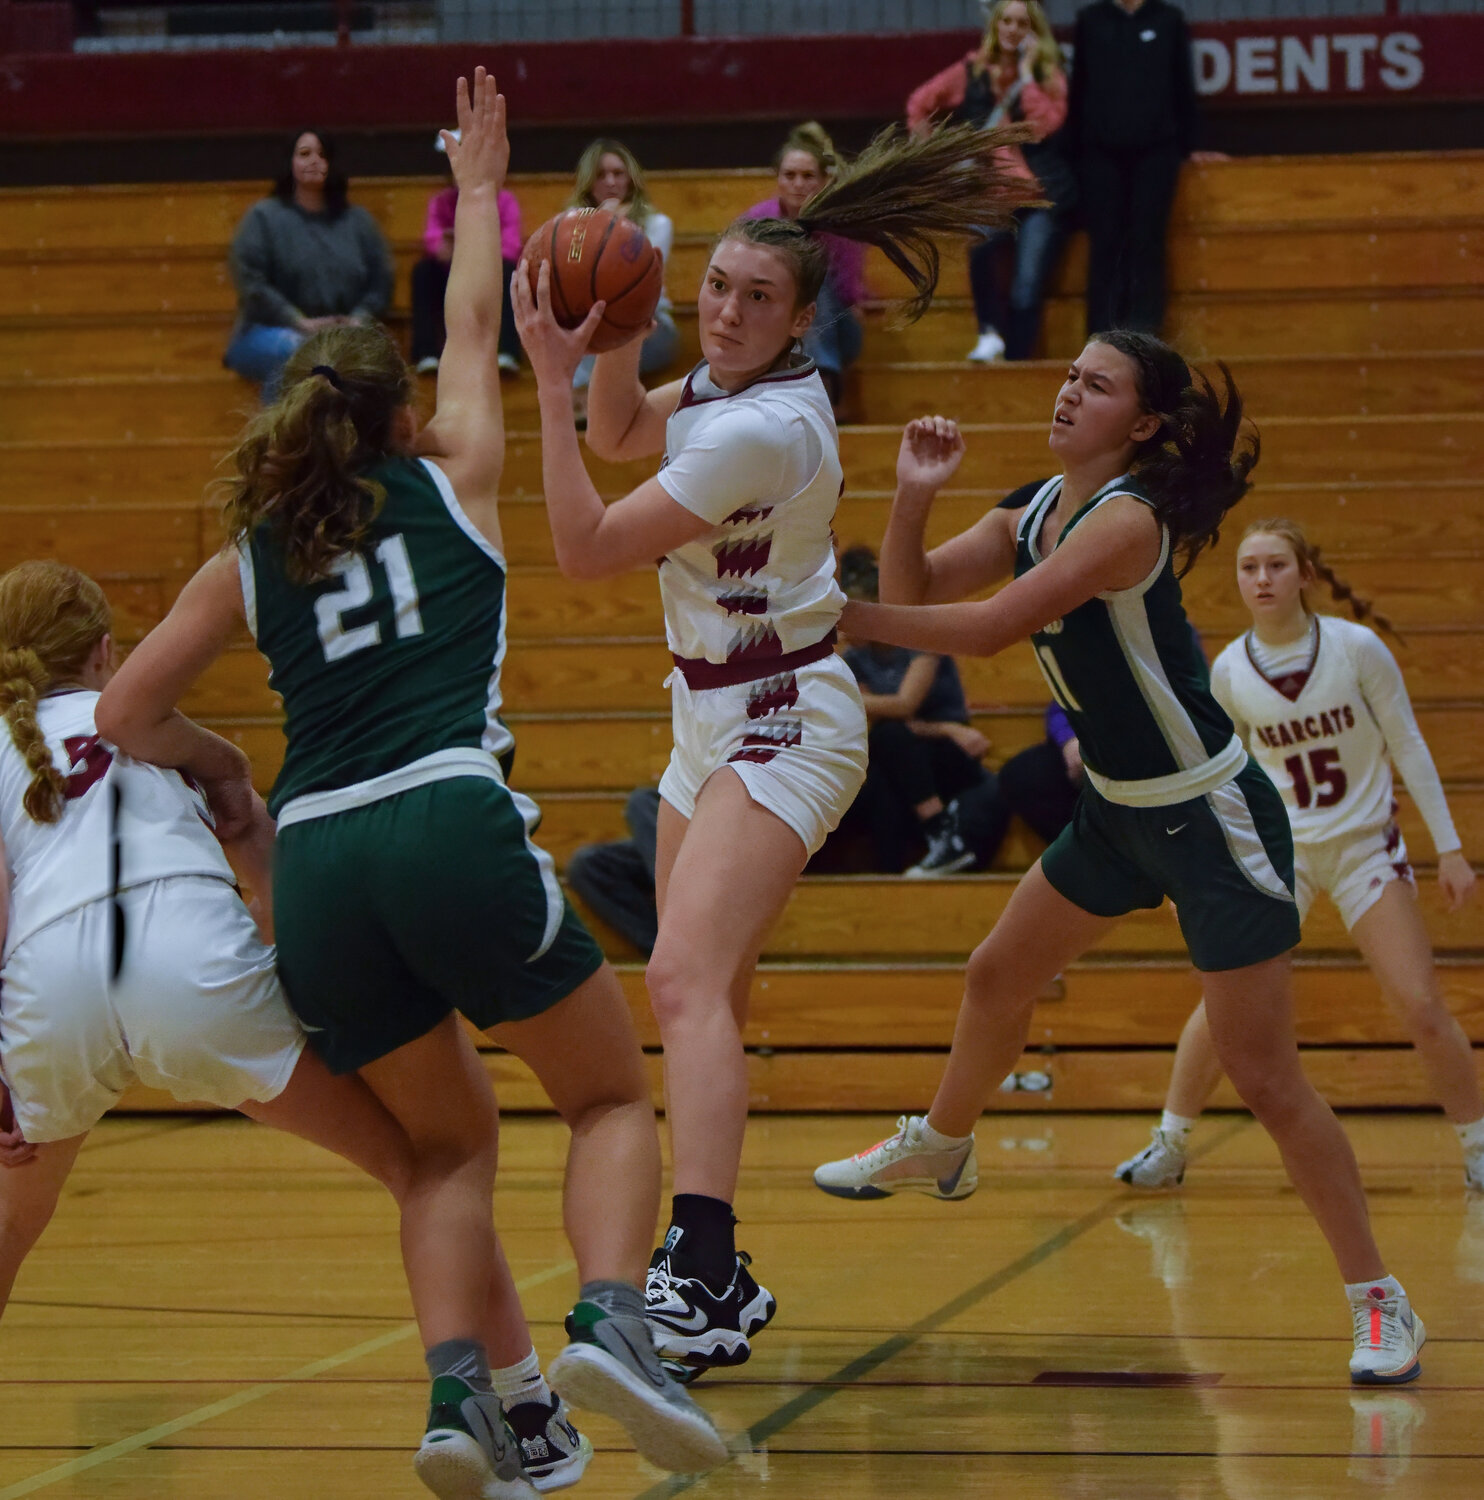 Julia Dalan comes down with a rebound during W.F. West's 57-24 win over Port Angeles on Dec. 2.